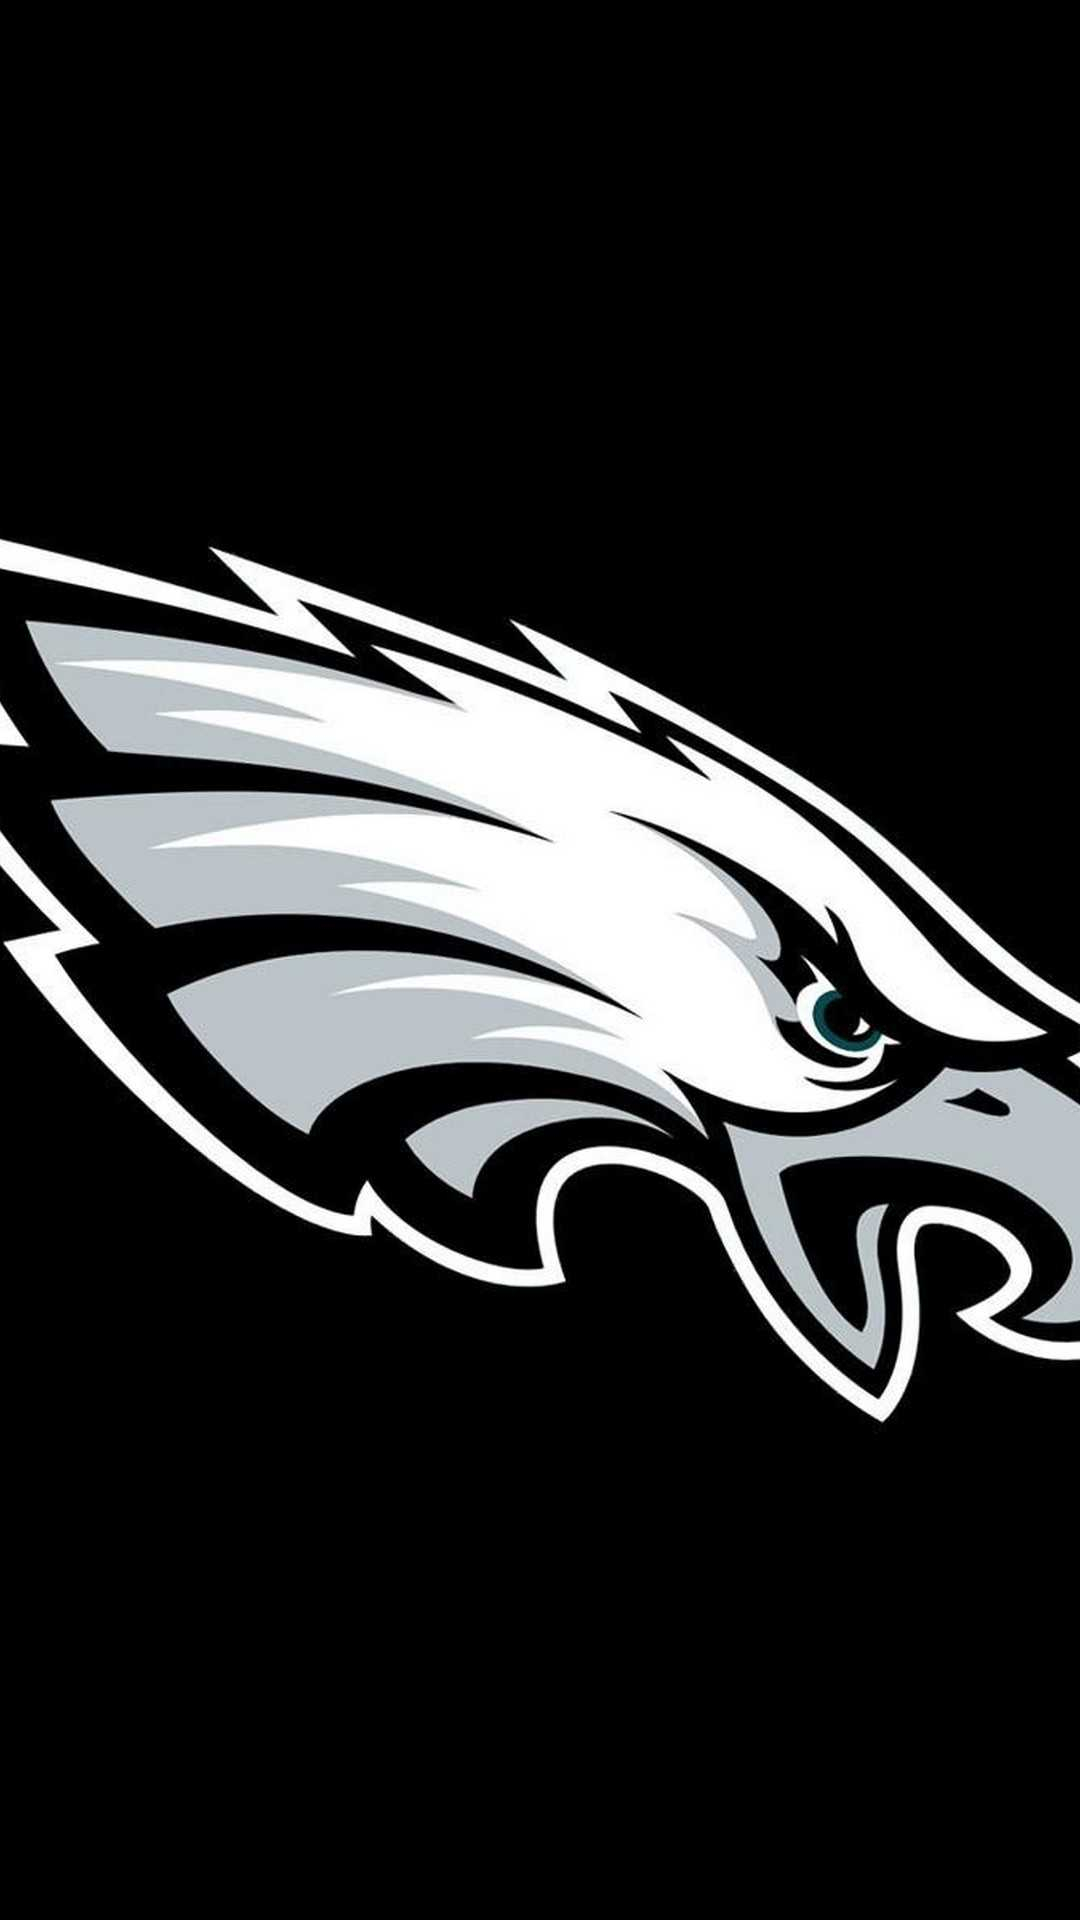 1080x1920 Eagles Wallpapers Awesome Free HD Wallpapers